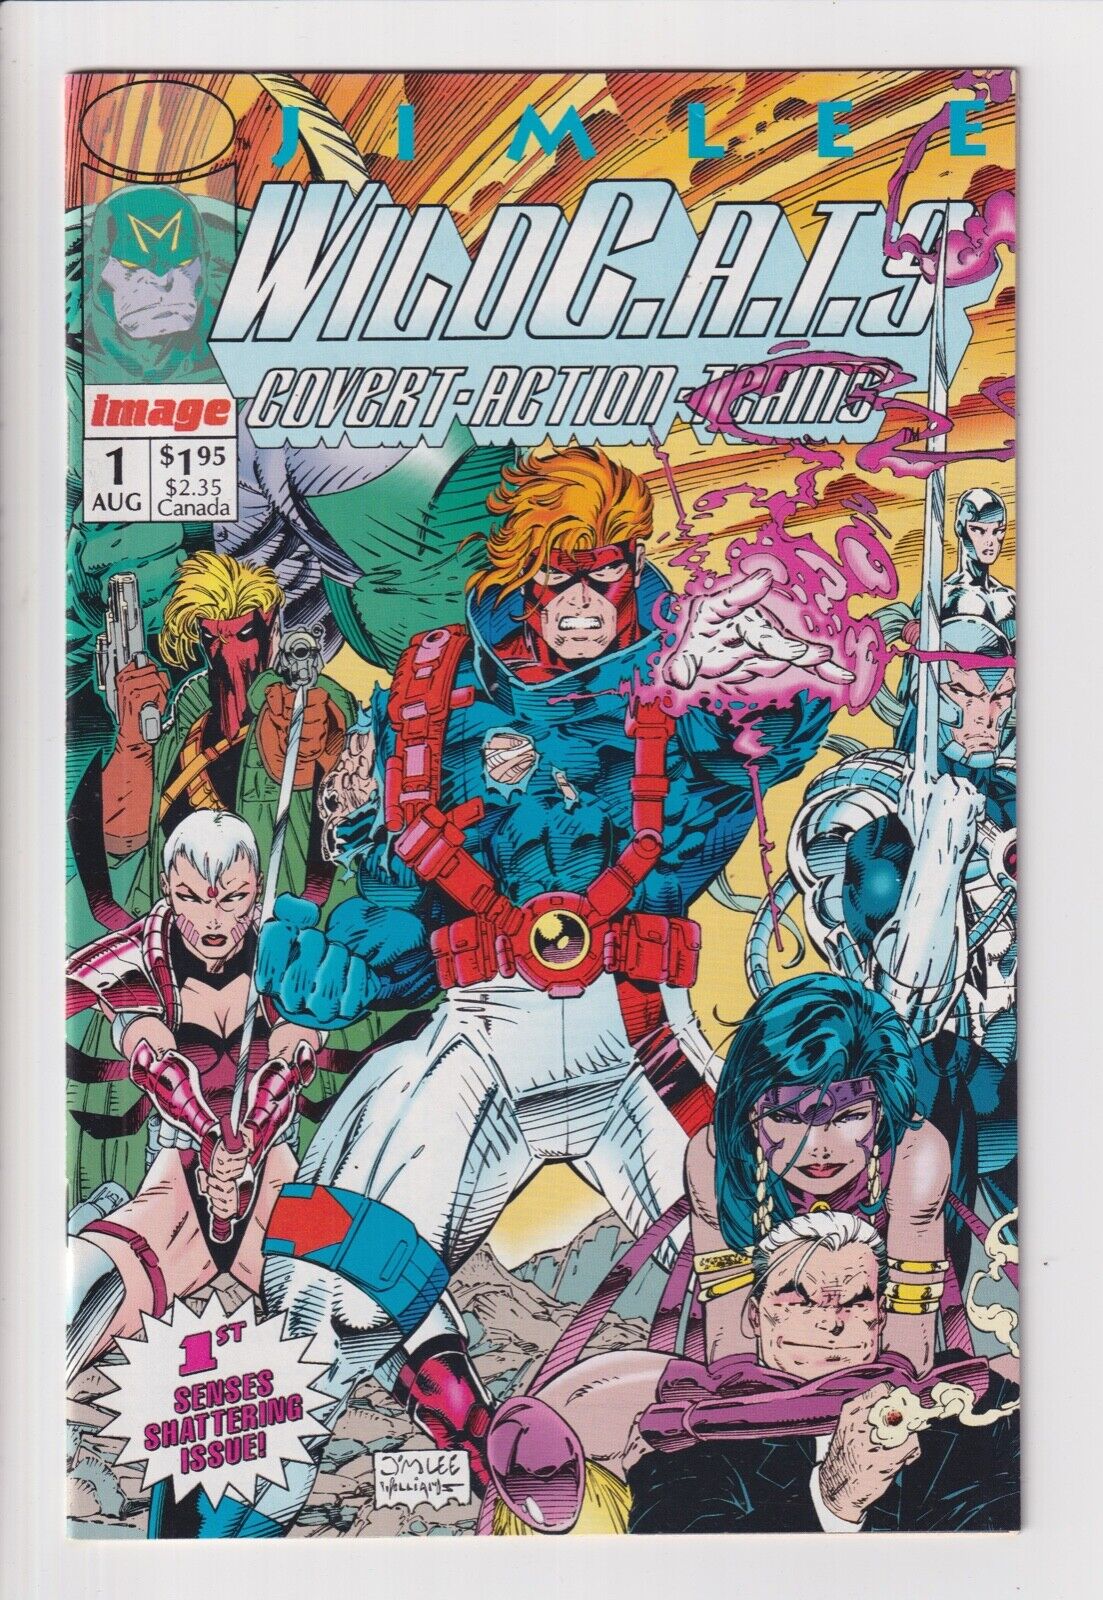 CLEARANCE BIN: WILDC.A.T.S: COVERT ACTION TEAMS VG 1992 comics sold SEPARATELY